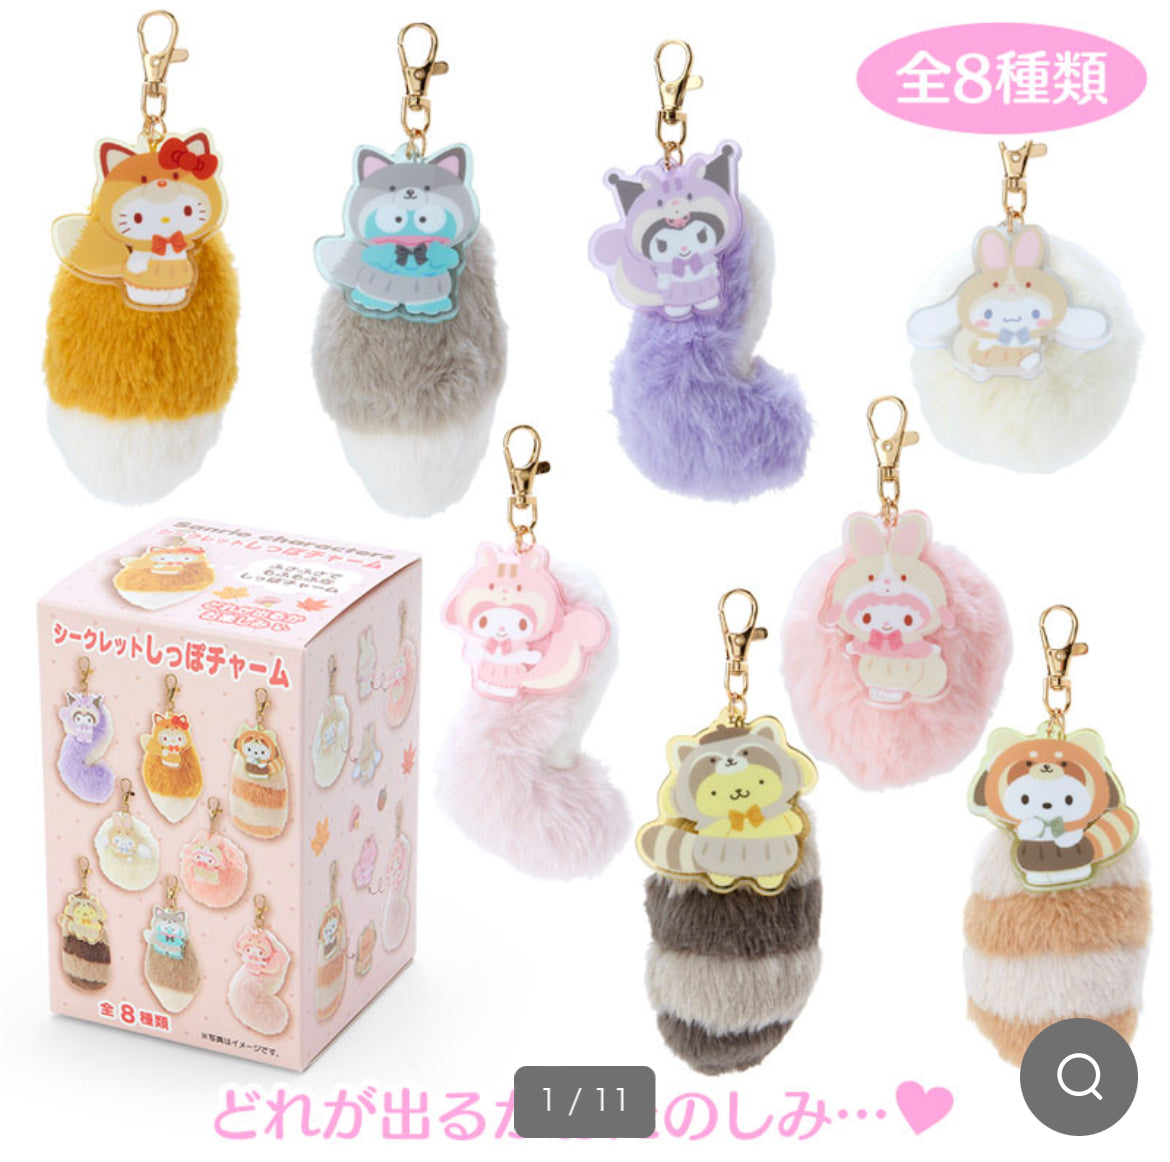 In Stock｜Sanrio Forest collection｜现货 三丽鸥童话森林系列